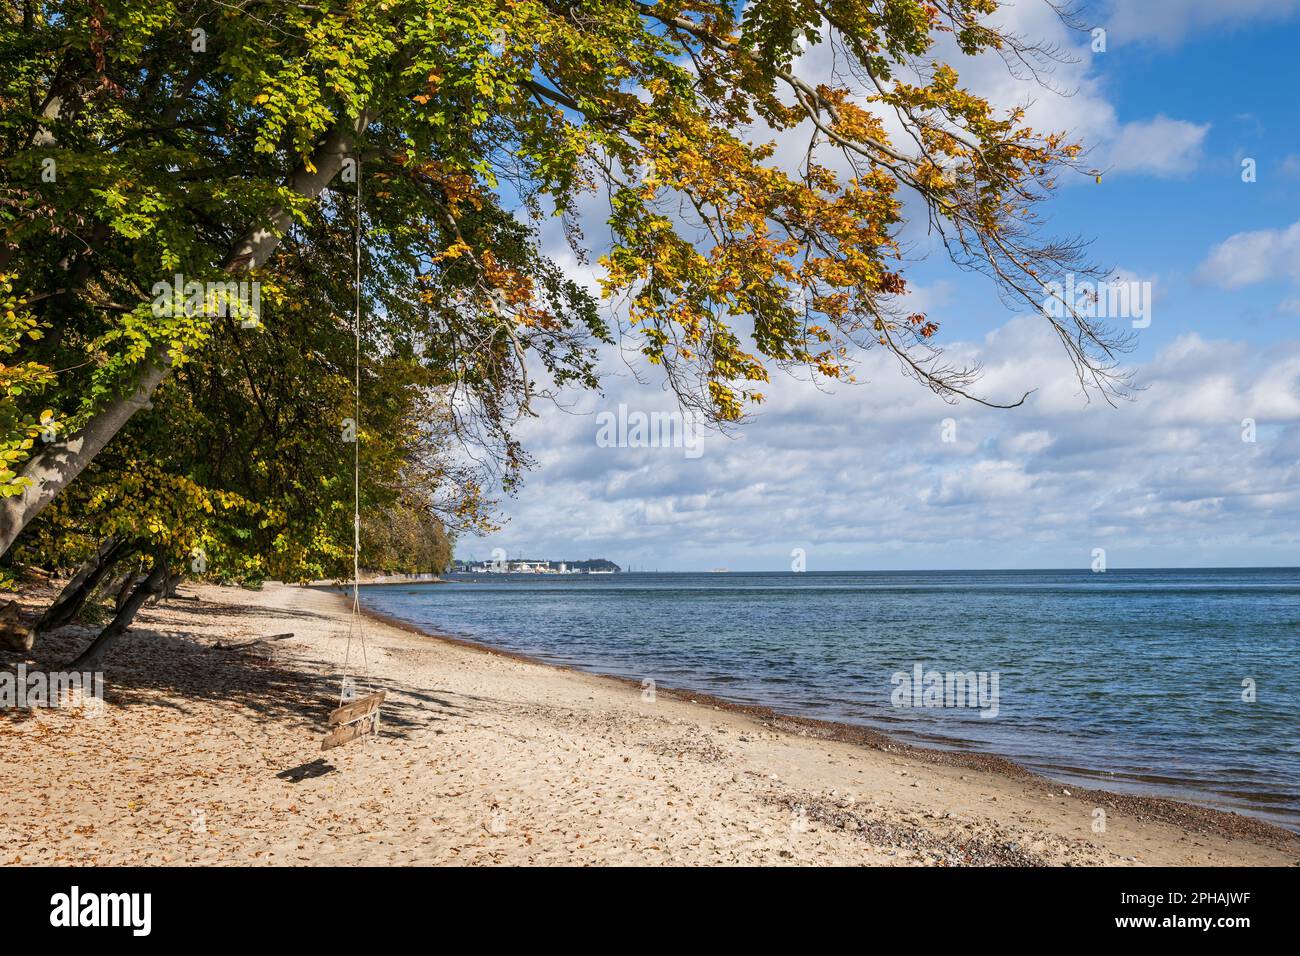 Swing on a tree leaning over sandy beach at the Baltic Sea in Gdynia, Poland. Stock Photo